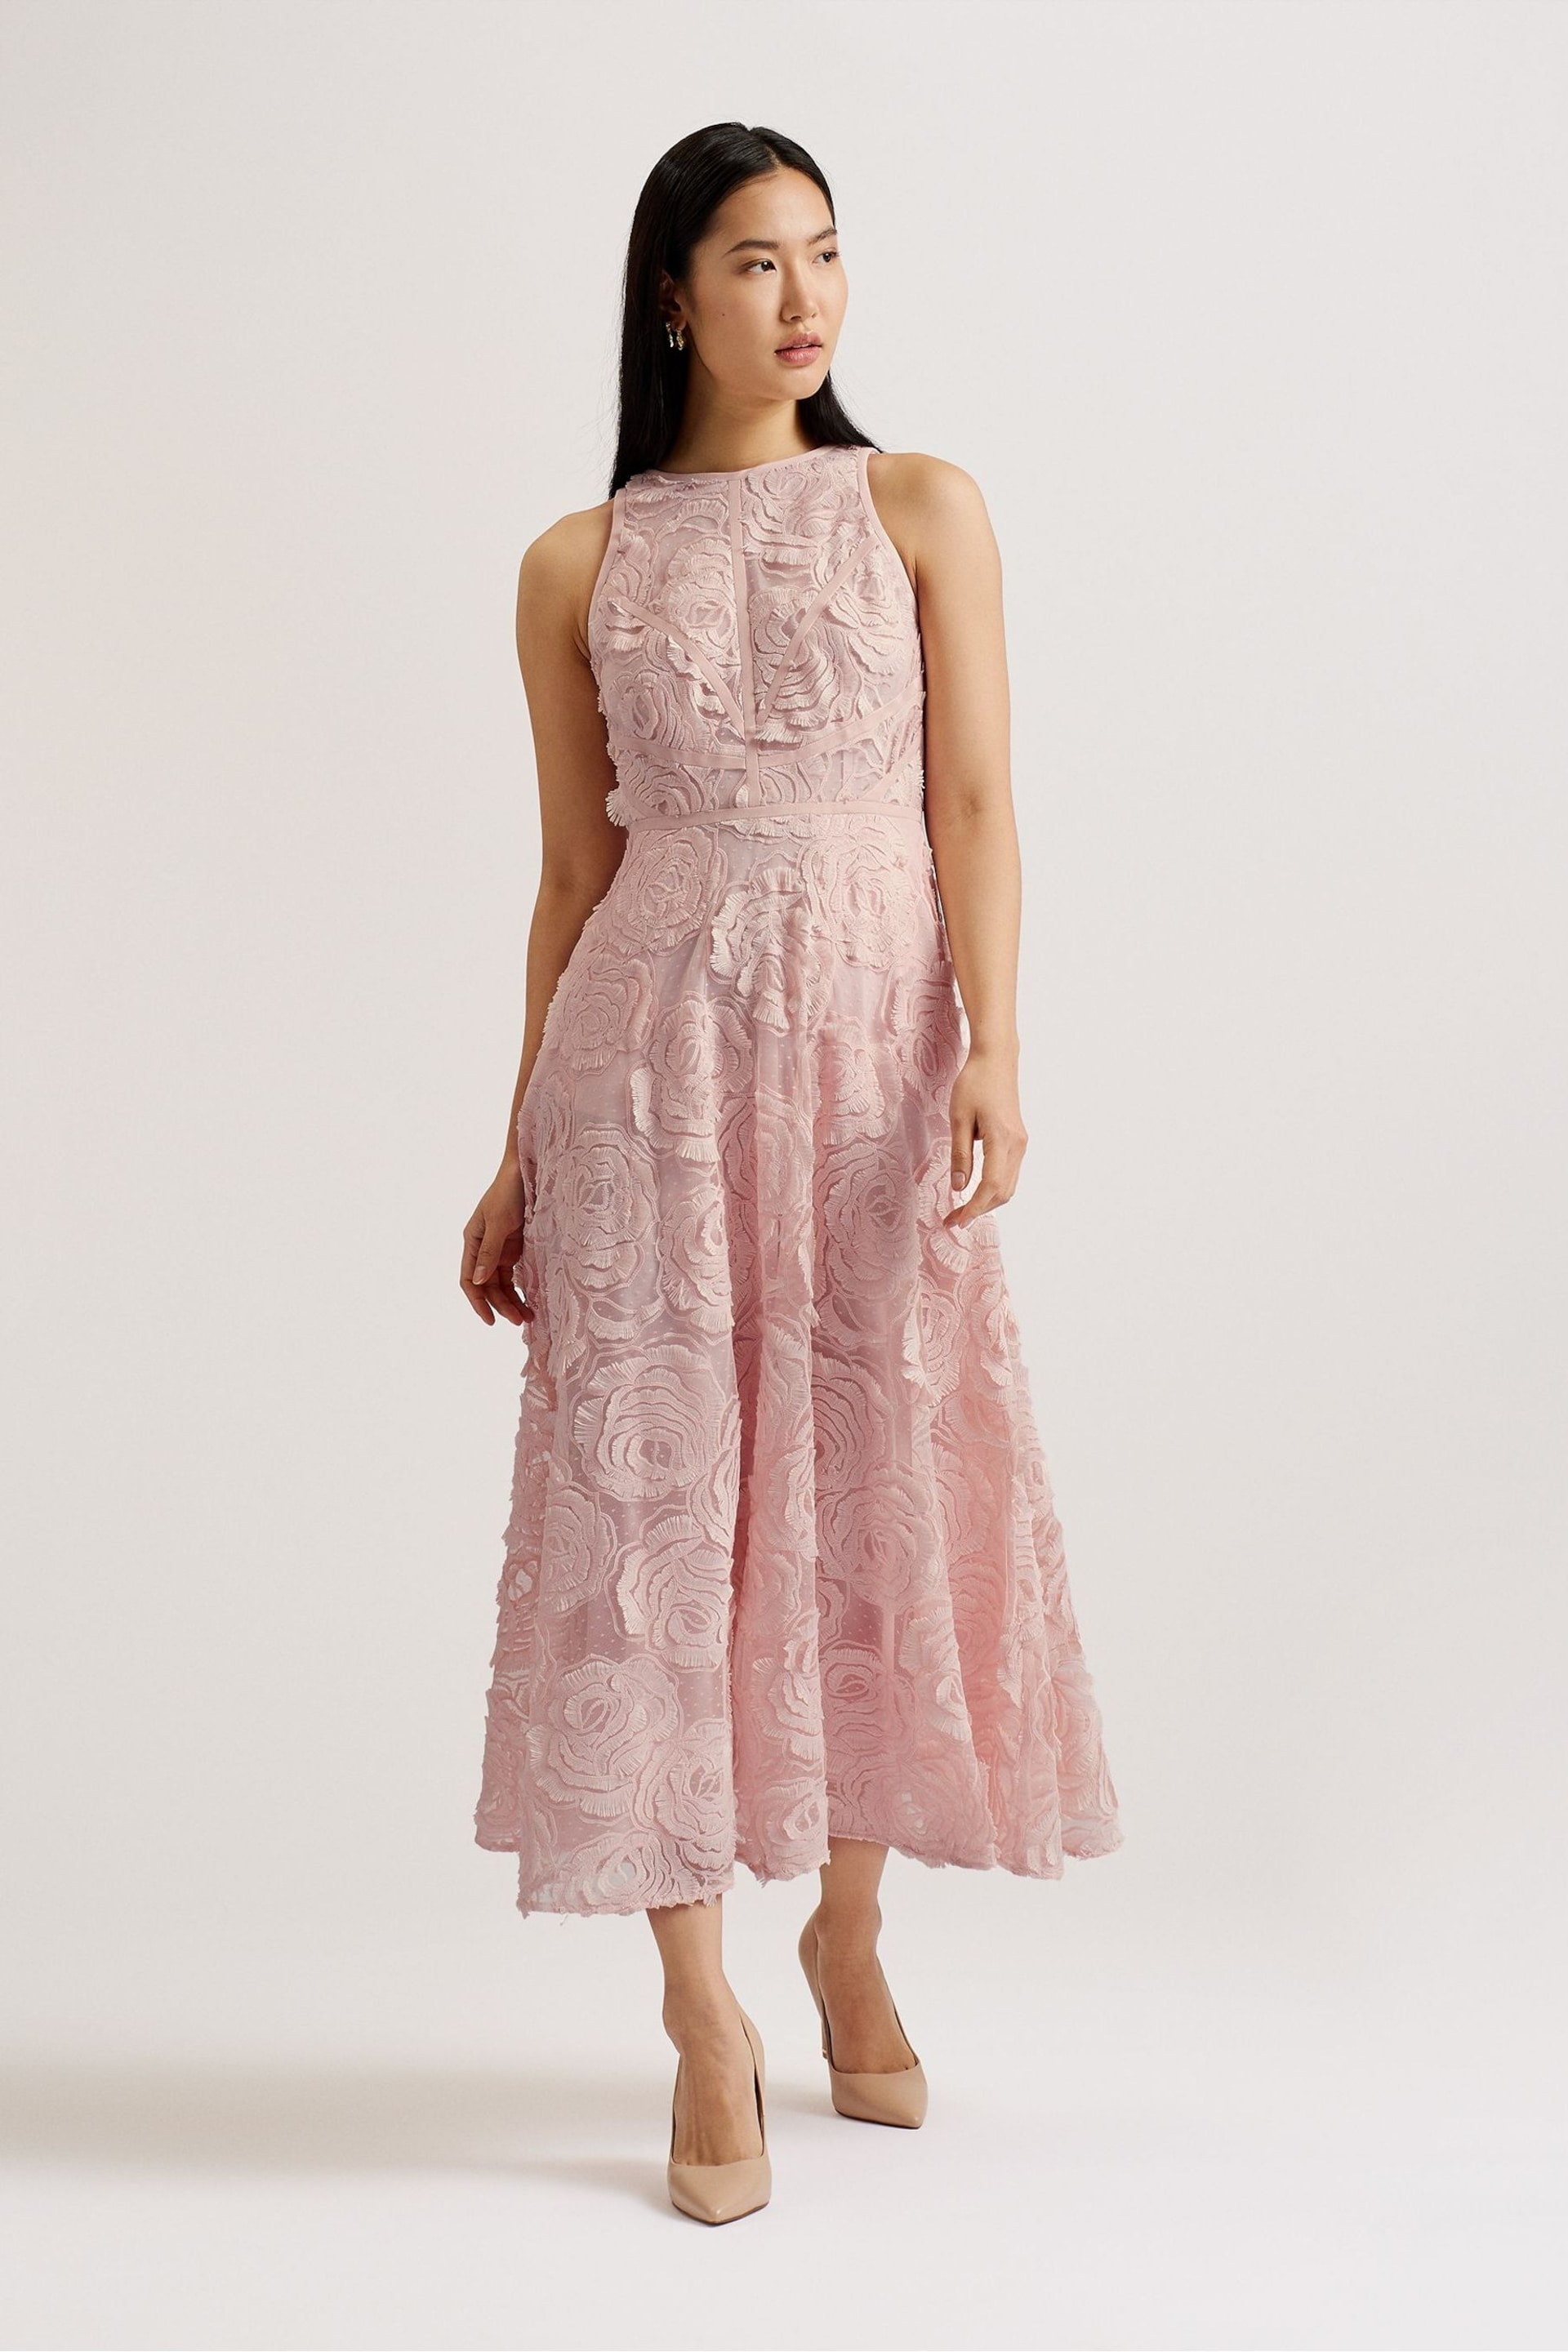 Ted Baker Pink Ullaa Sleeveless Midi Dress With Contrast Detail - Image 1 of 5